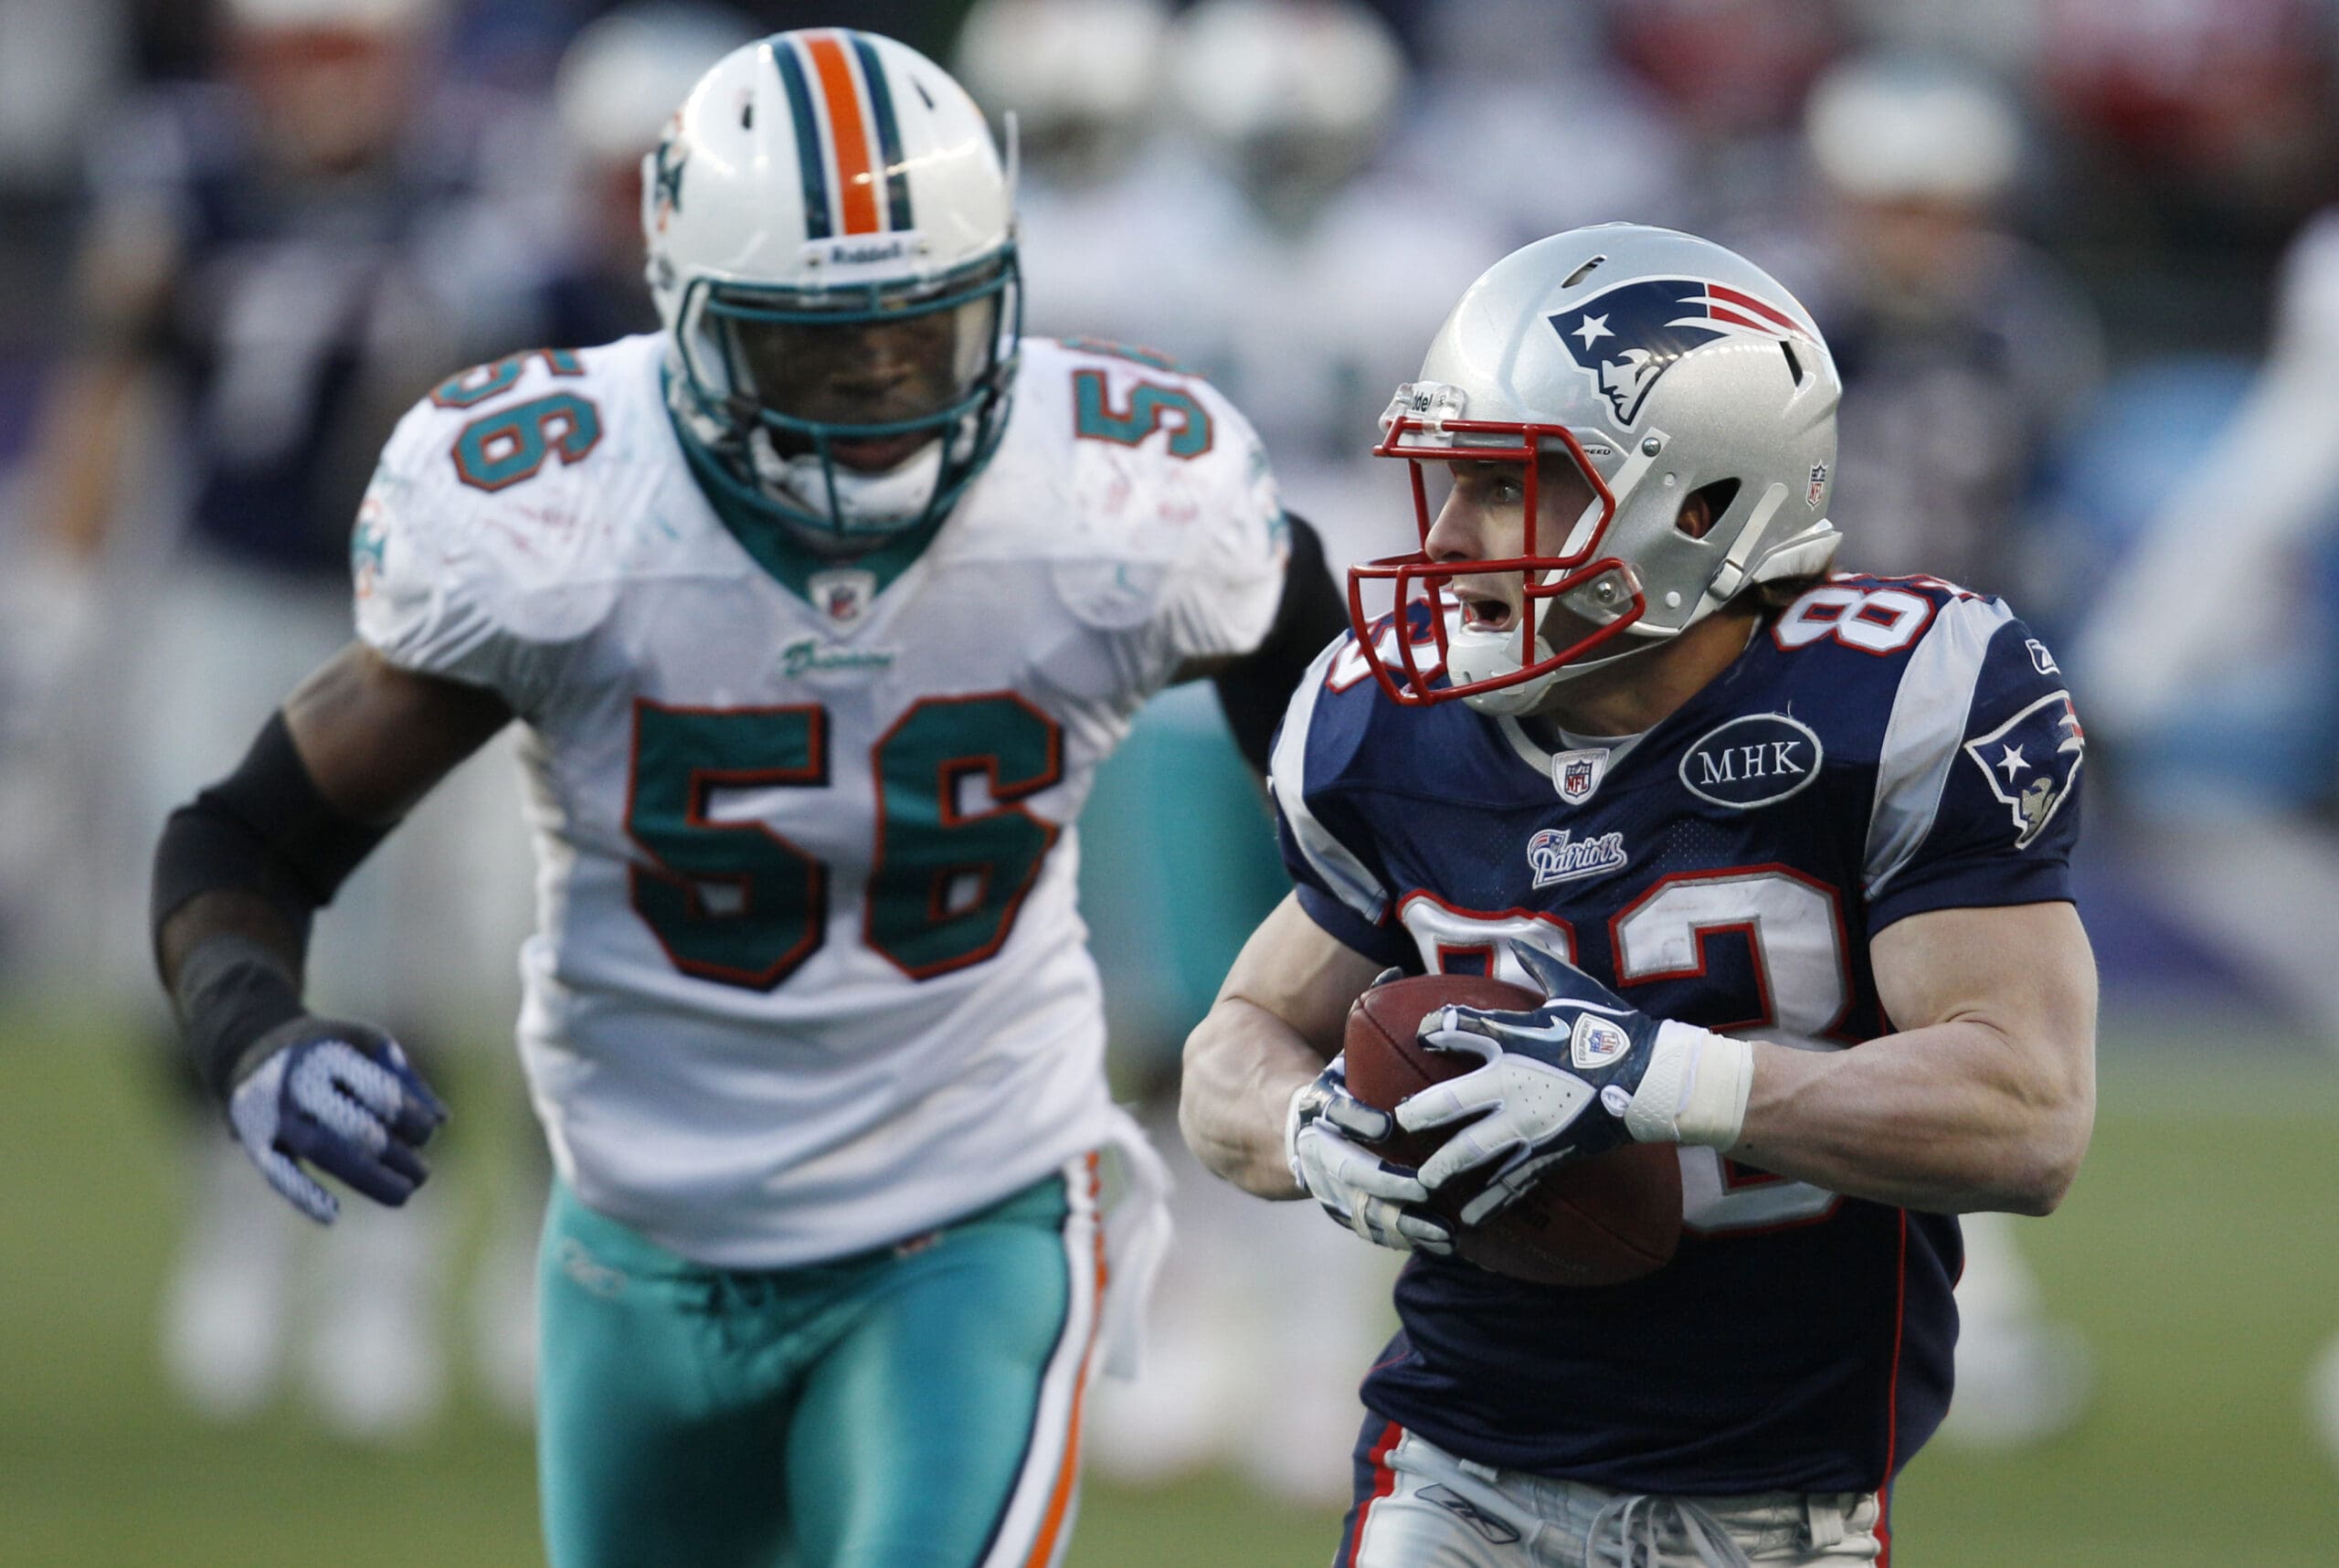 New England Patriots WR Wes Welker runs away from the Miami Dolphins defender